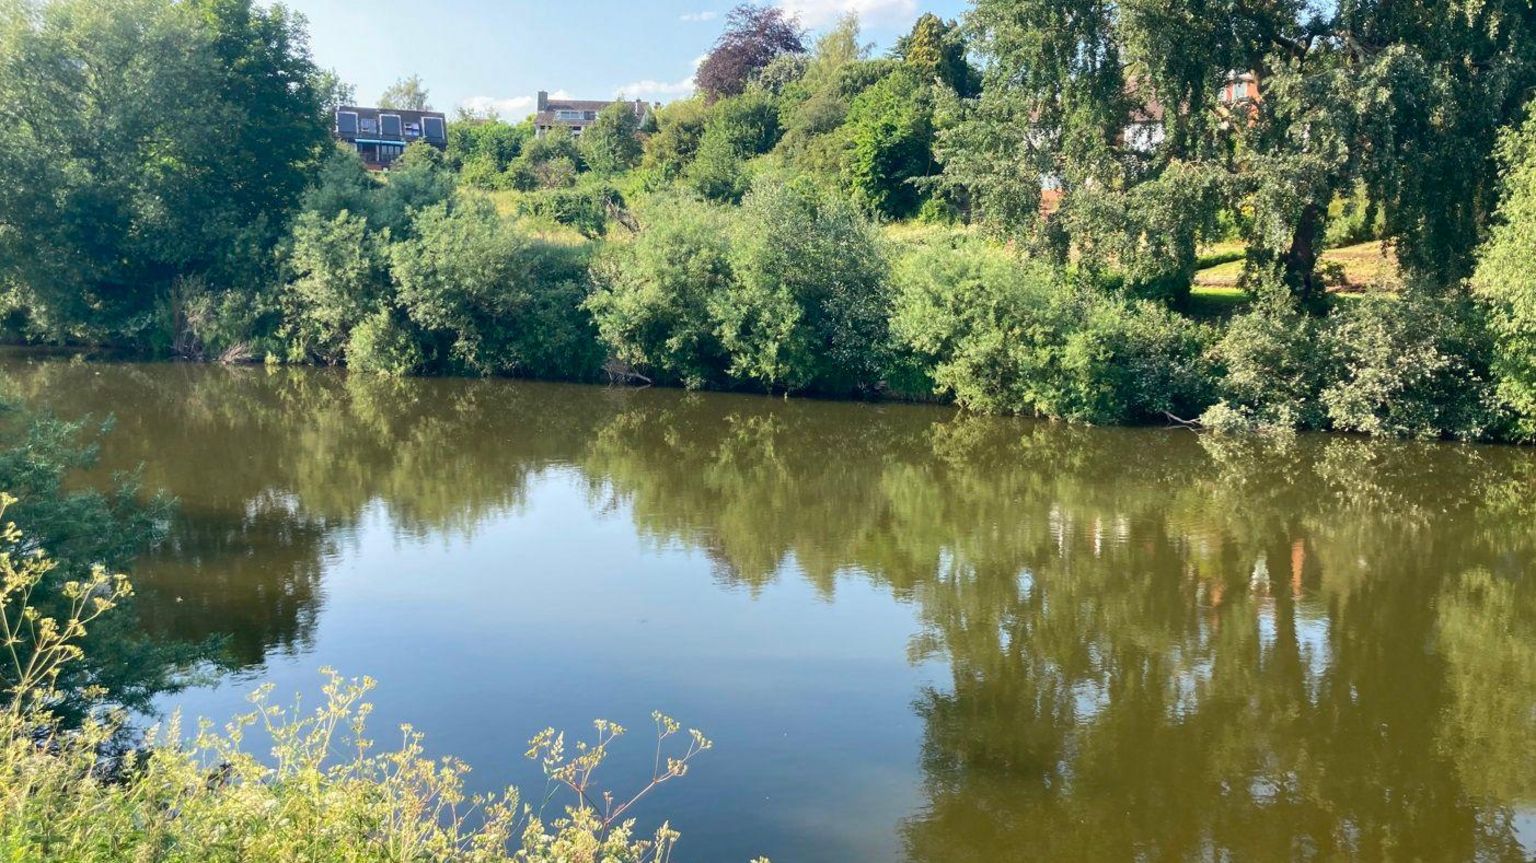 The River Wye in Hereford